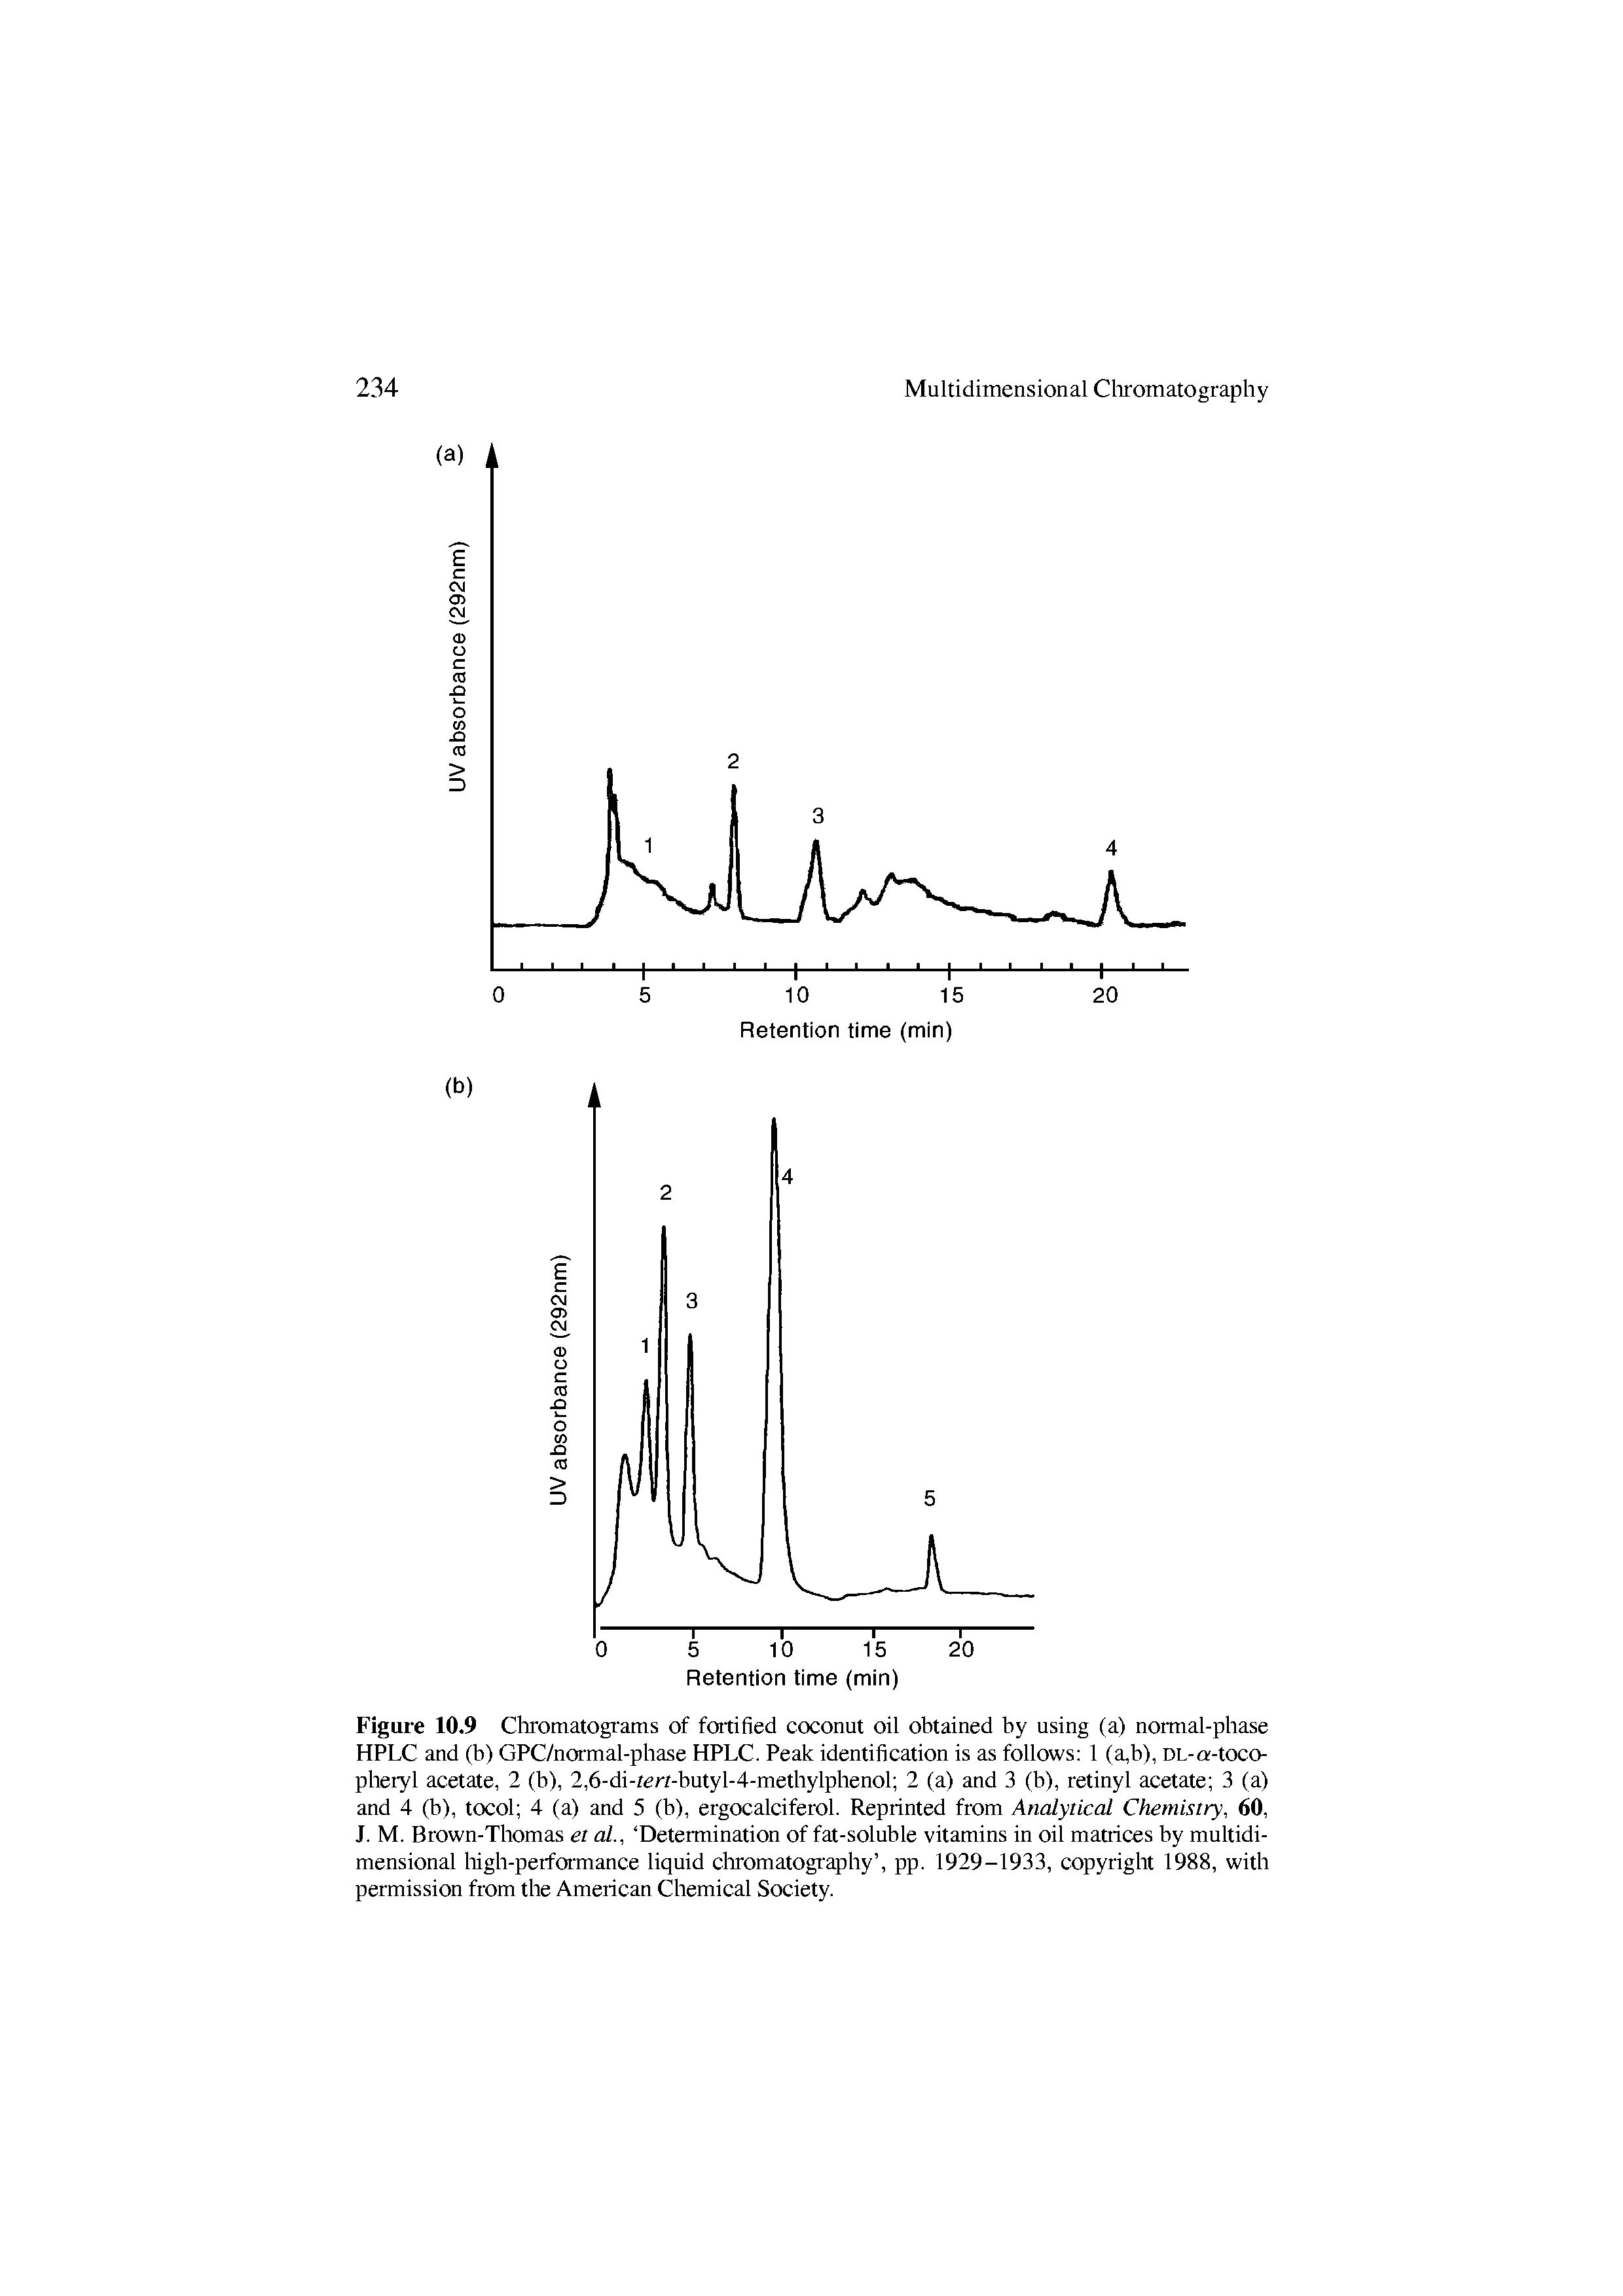 Figure 10.9 Cliromatogi ams of foitified coconut oil obtained by using (a) normal-phase HPLC and (b) GPC/noimal-phase HPLC. Peak identification is as follows 1 (a,b), DL-a-toco-pheryl acetate, 2 (b), 2,6-di-tert-butyl-4-methylphenol 2 (a) and 3 (b), retinyl acetate 3 (a) and 4 (b), tocol 4 (a) and 5 (b), ergocalciferol. Reprinted from Analytical Chemistry, 60, J. M. Brown-Thomas et al., Determination of fat-soluble vitamins in oil matrices by multidimensional liigh-peiformance liquid cliromatography , pp. 1929-1933, copyright 1988, with permission from the American Chemical Society.